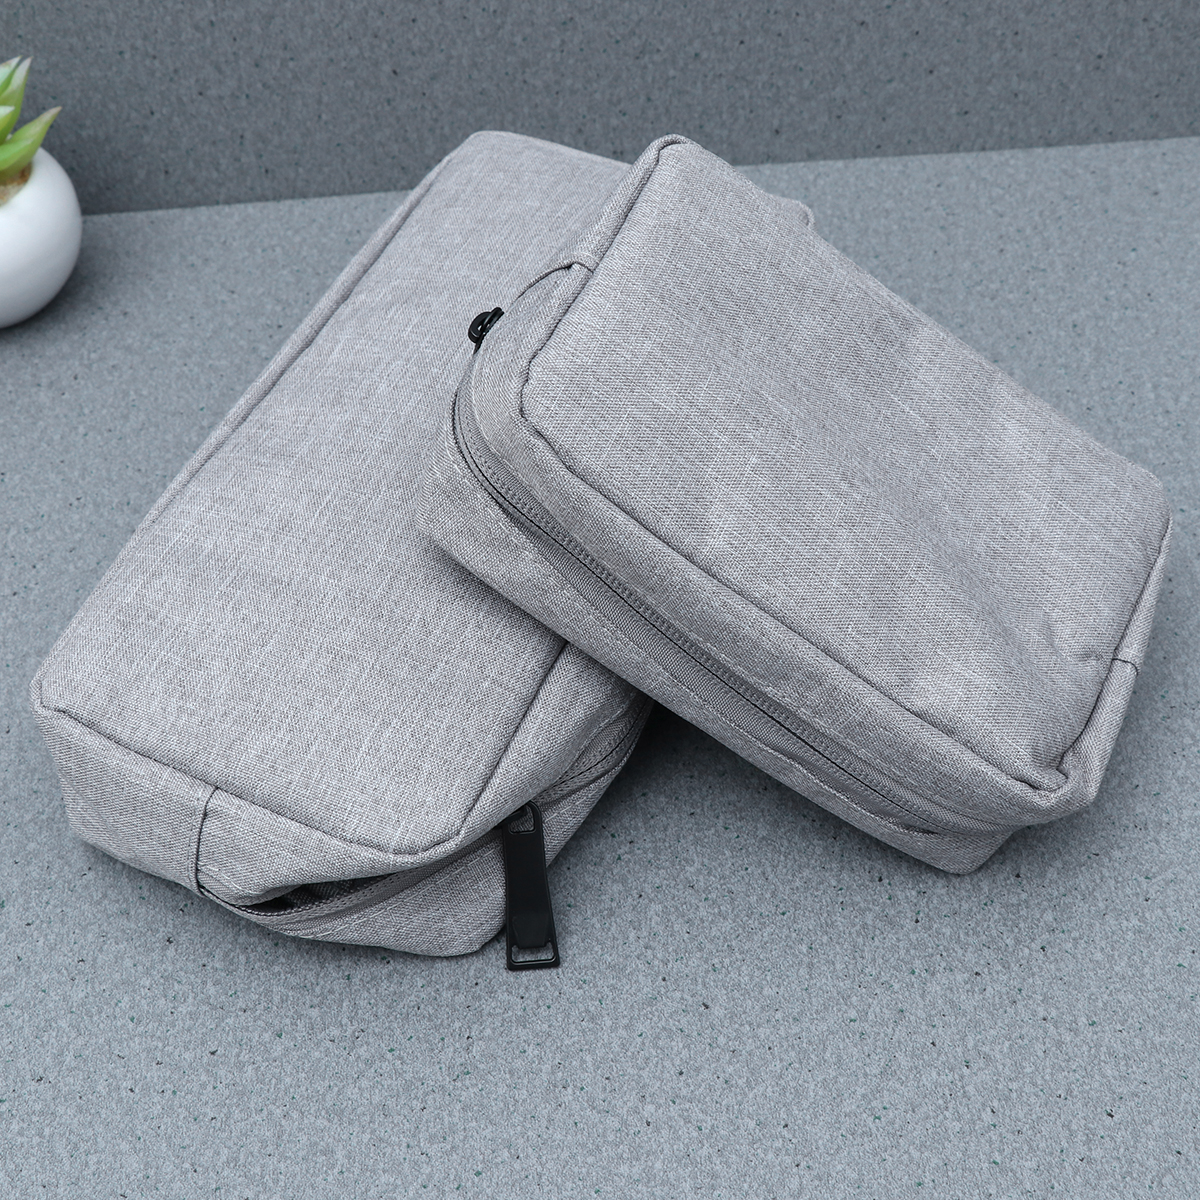 2pcs Digital Accessories Storage Bag Electronics Protection Pouch Organizer for Charger USB Cable Earphone (Grey, Large Size+Small Size) - image 3 of 6